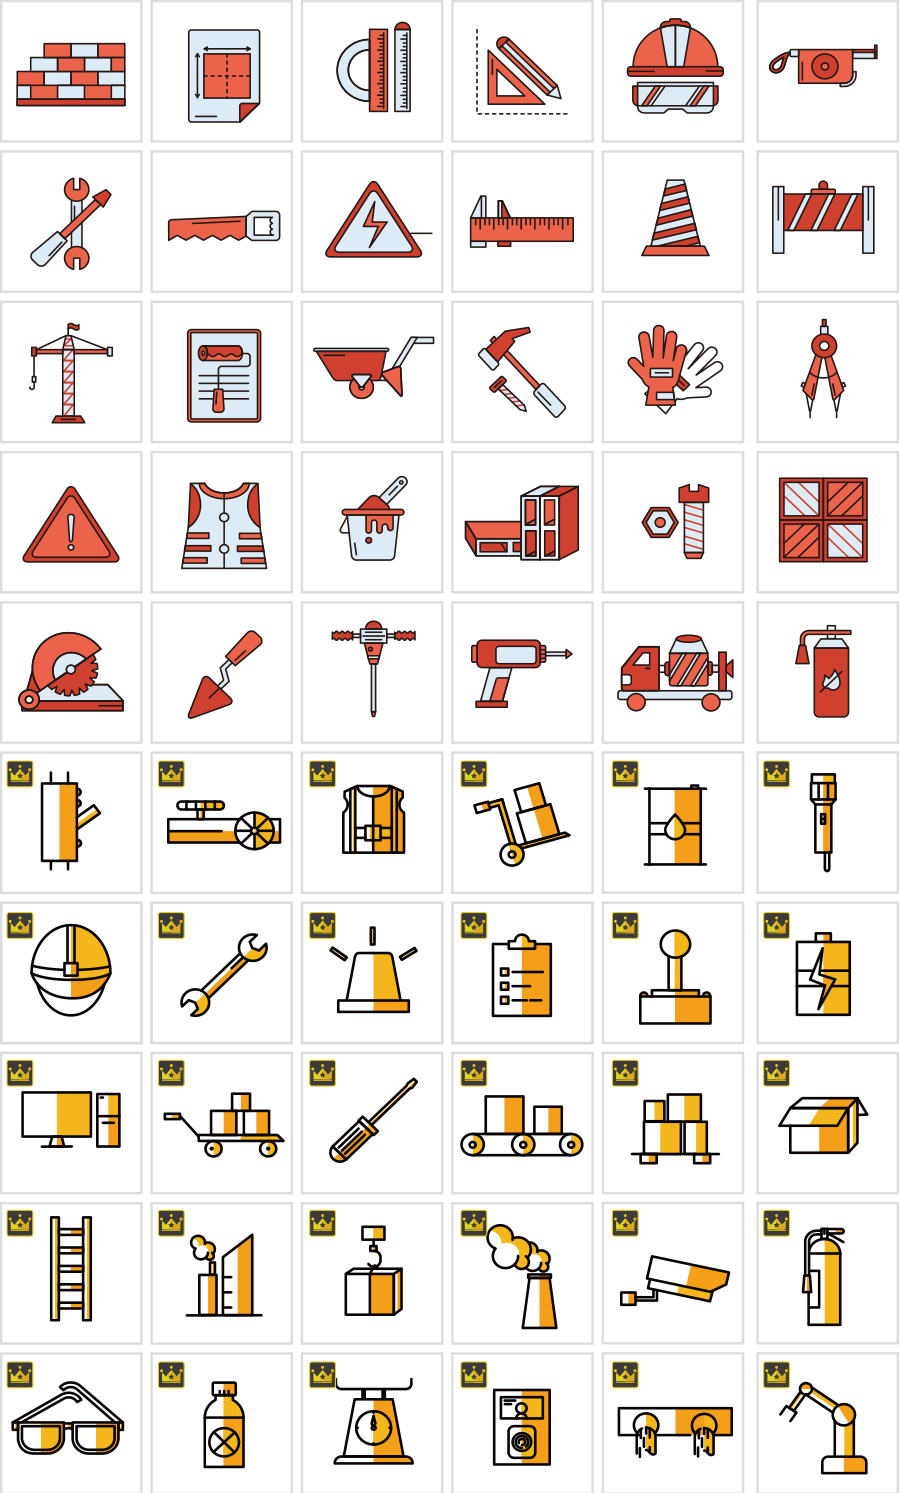 Construction and factory icons